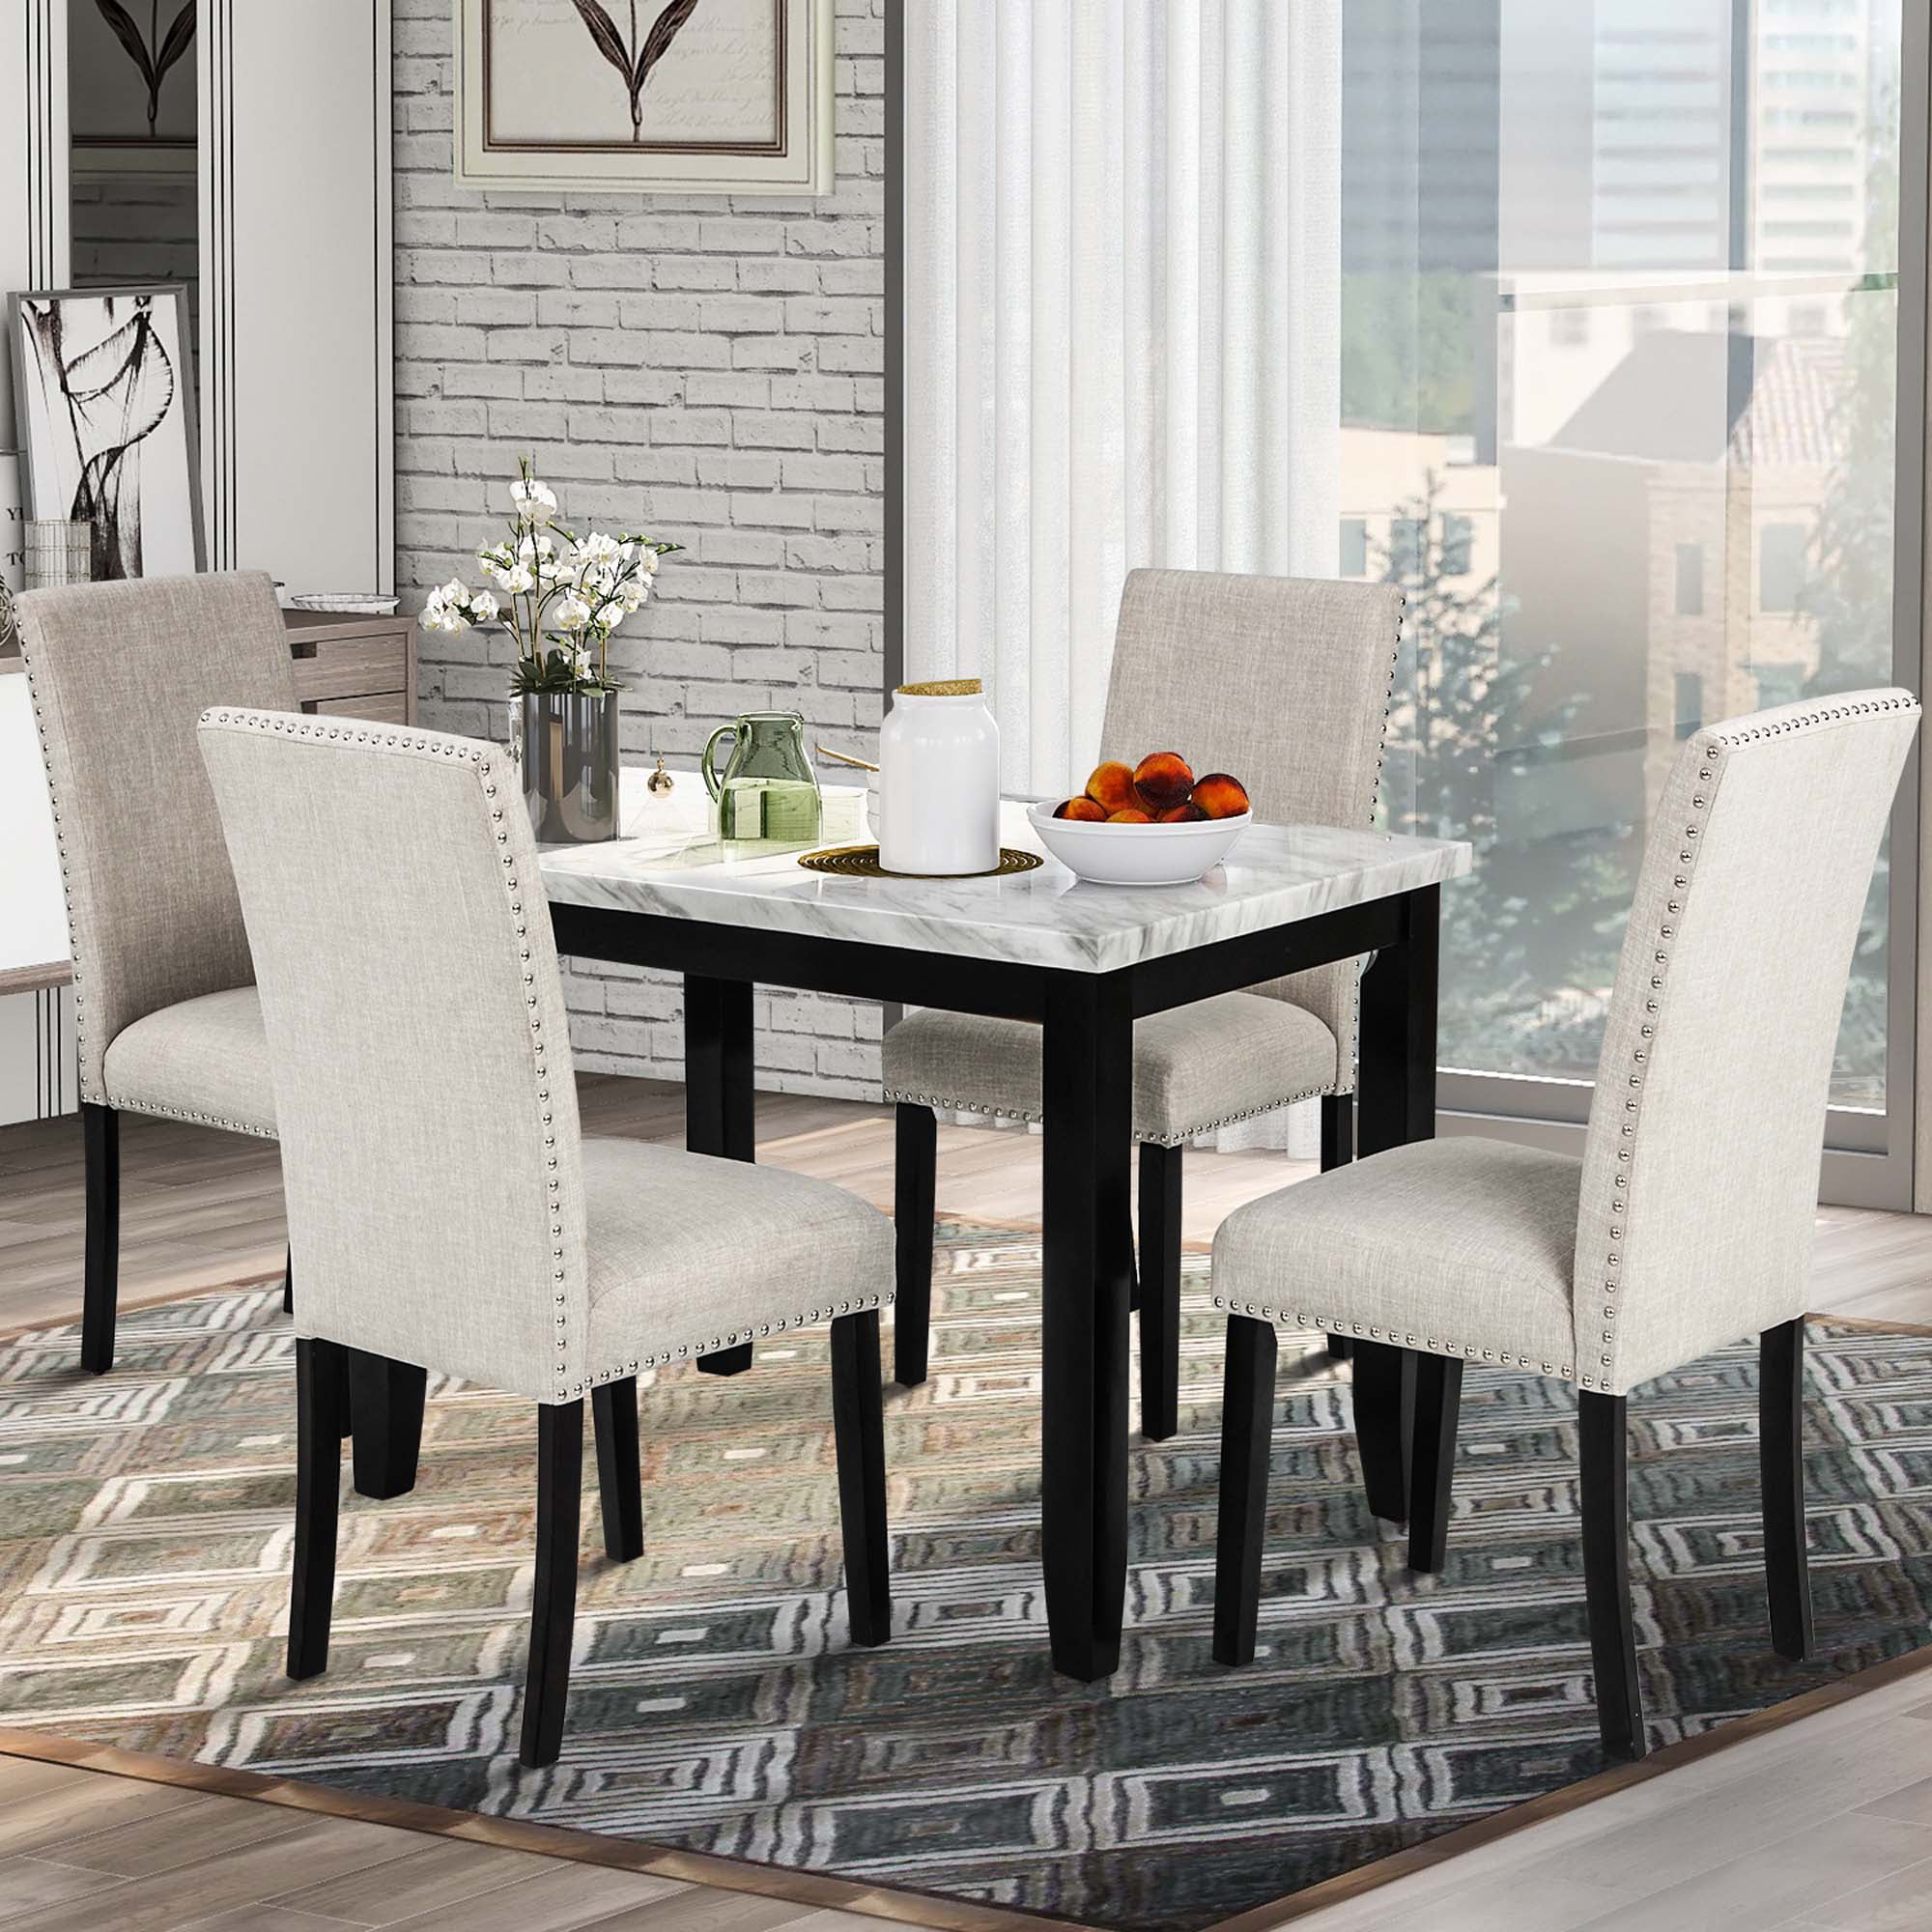 hospital Adult satellite 5 Piece Kitchen Dining Table Set, Modern Marble Dining Room Table w/ 4  Upholstered Chairs, Kitchen Breakfast Nook Table Set, Contemporary Wood  Dining Table Set for Hotel Kitchen Restaurant, T2695 - Walmart.com